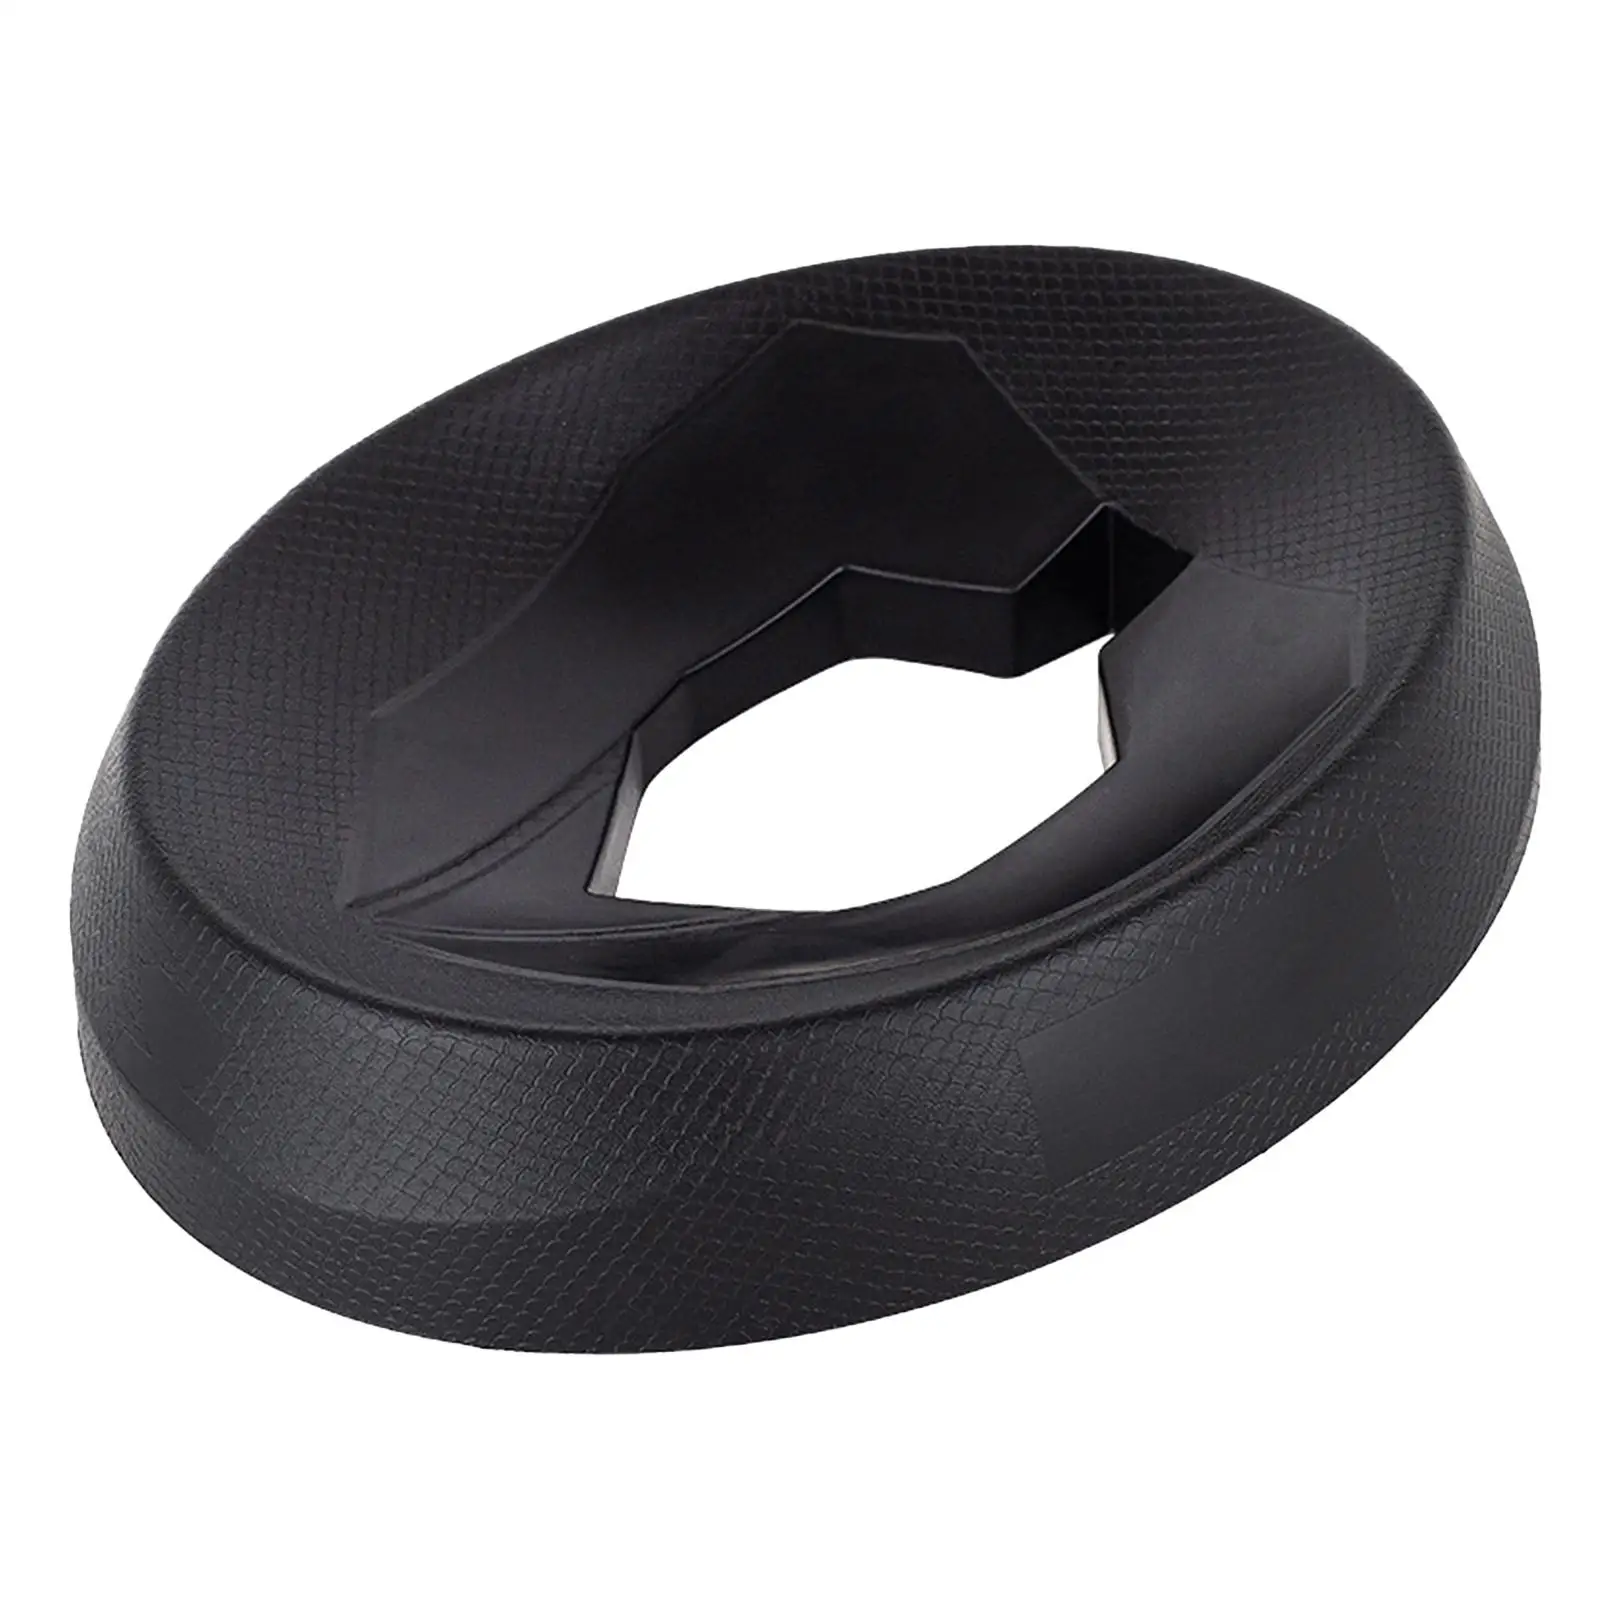 Helmet Support Pad Portable Nonslip Compact Ring Stand Donut Home Use Protection Pad Helmet Display Base for Motorcycle